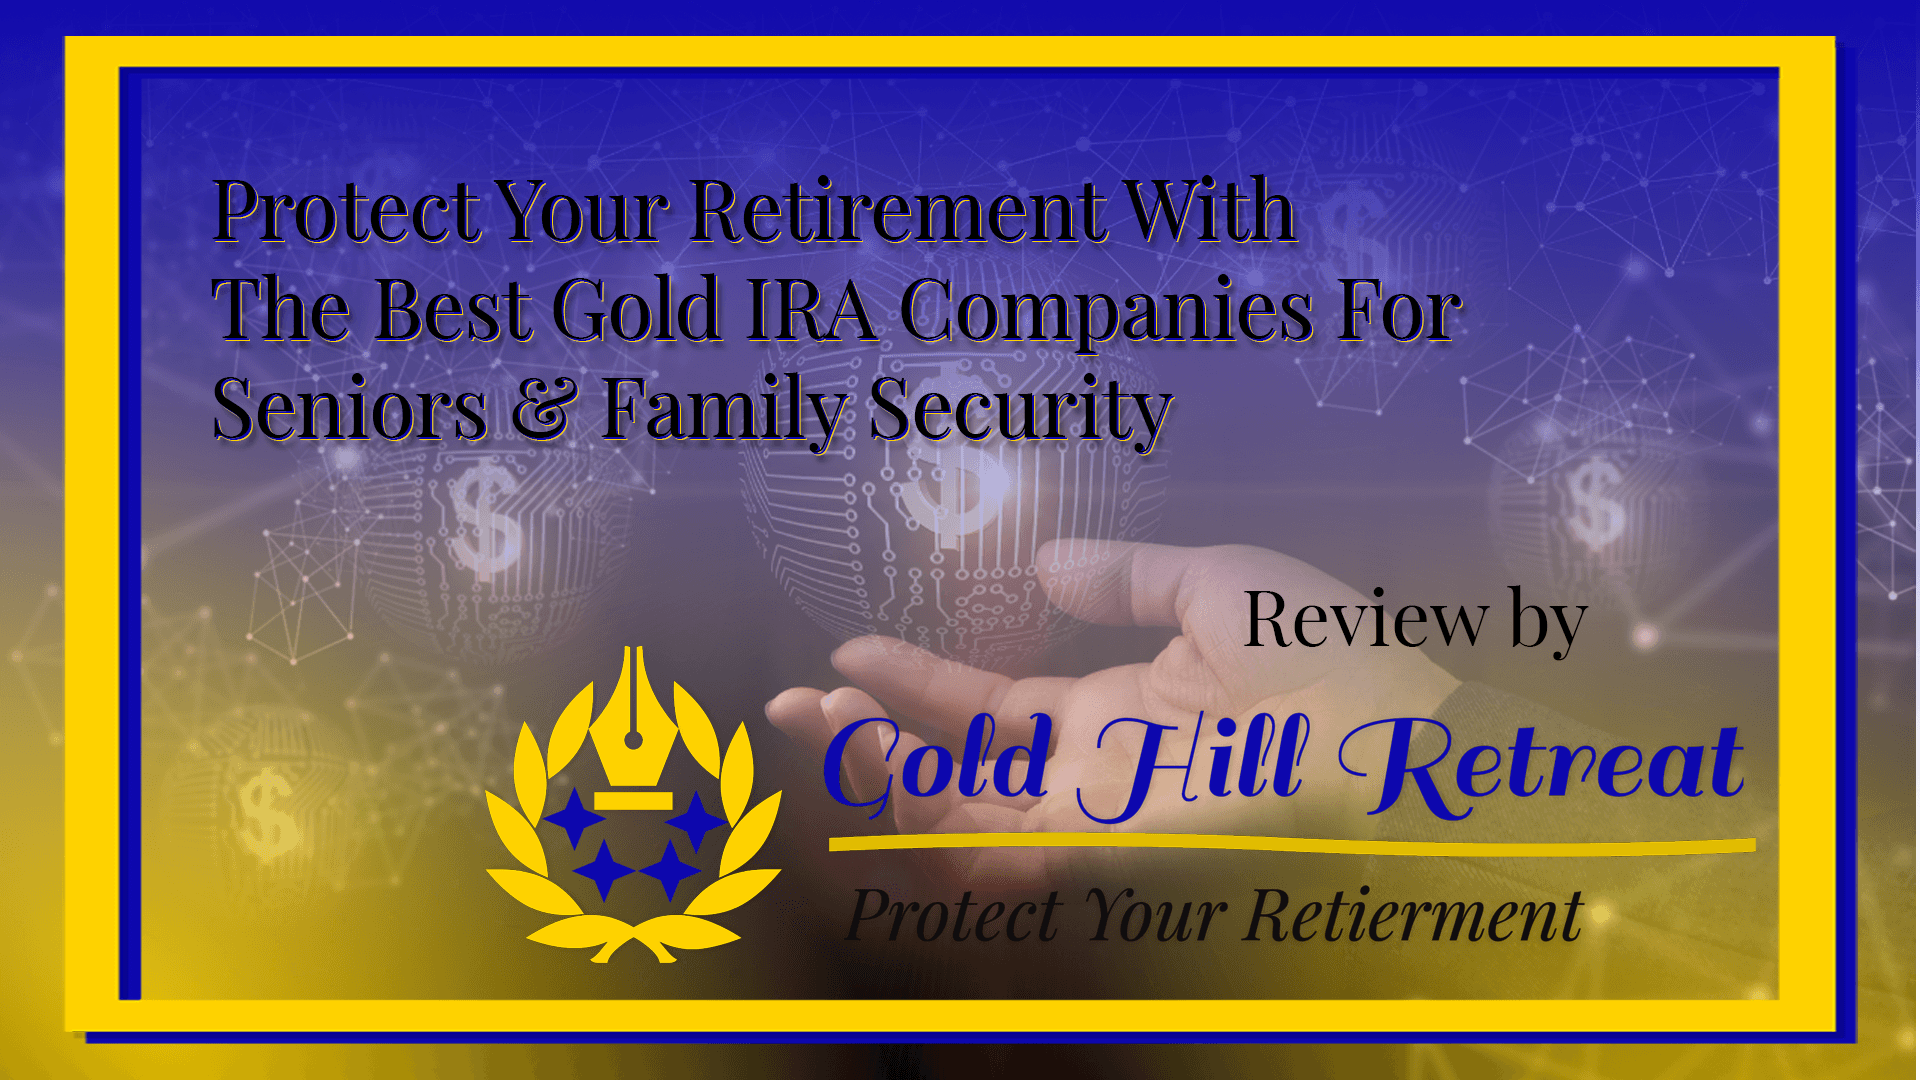 Protect Your Retirement With The Best Gold IRA Companies For Seniors & Family Security